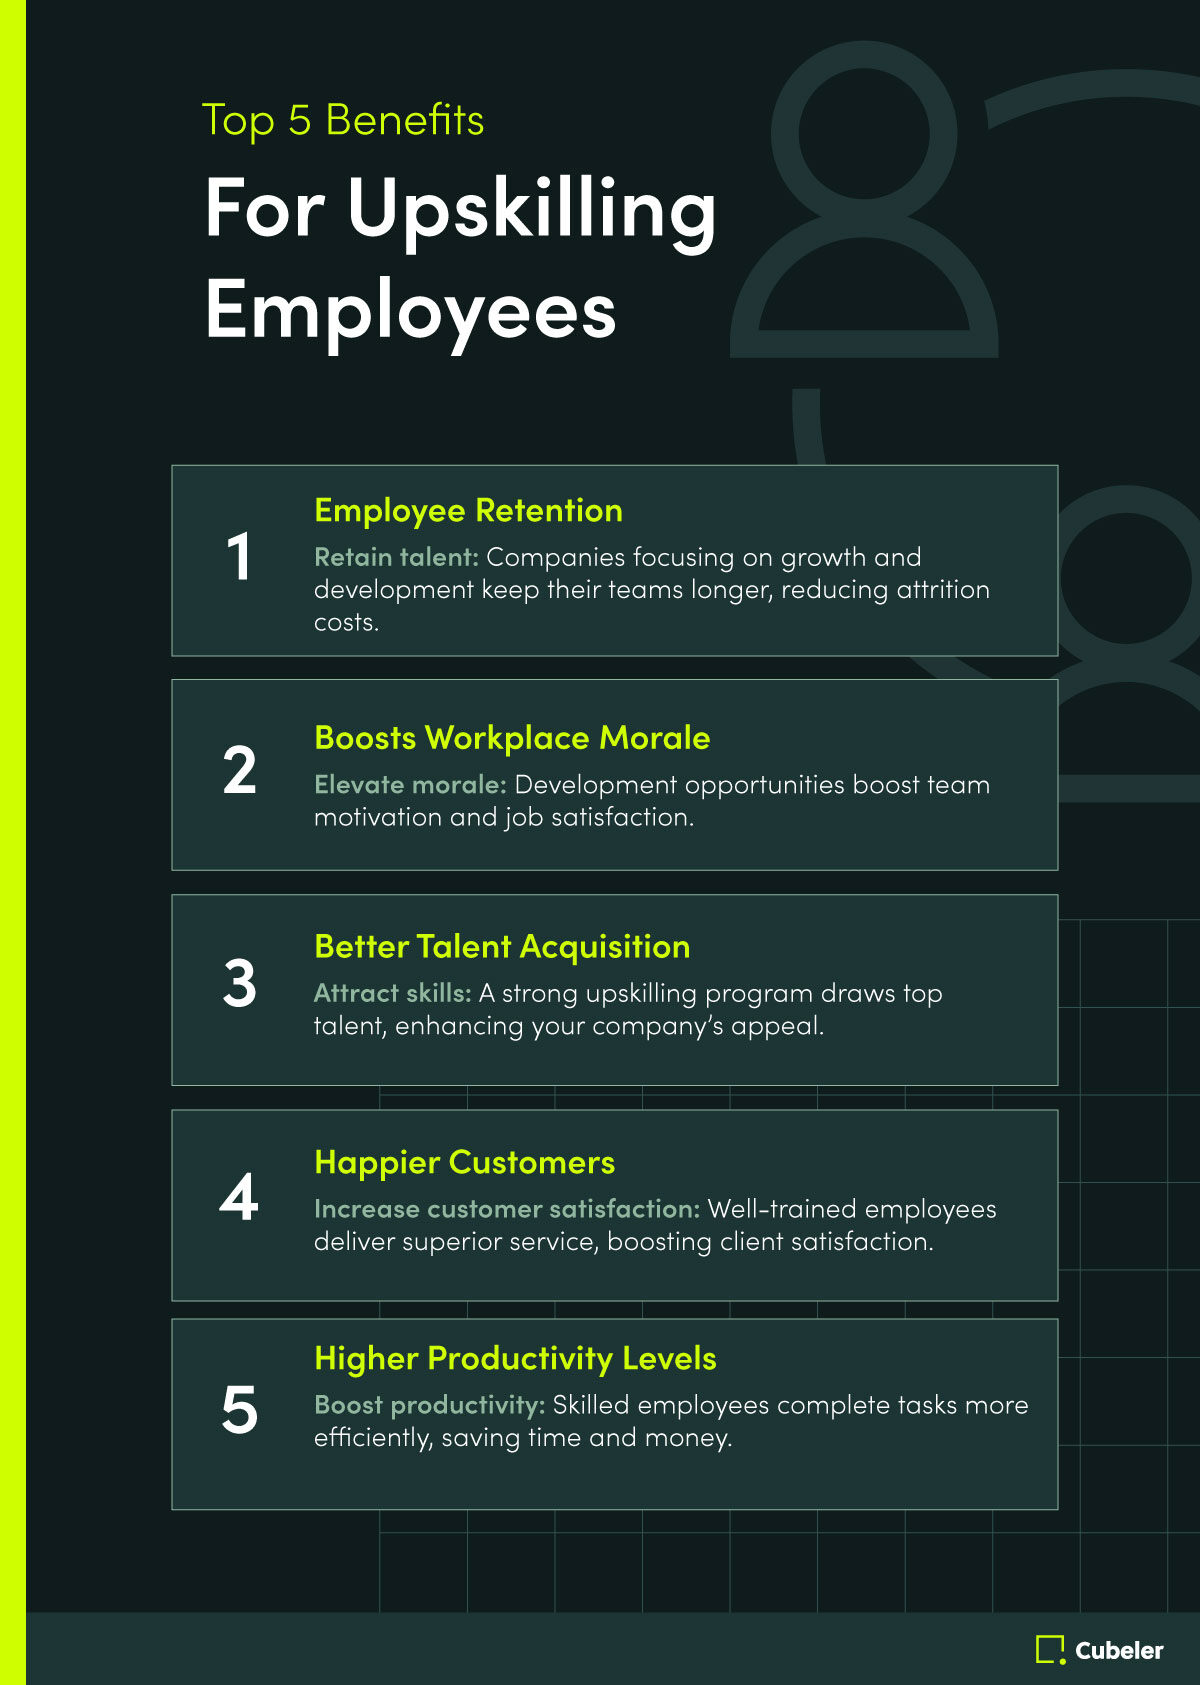 Top 5 Benefits of Upskilling Employees